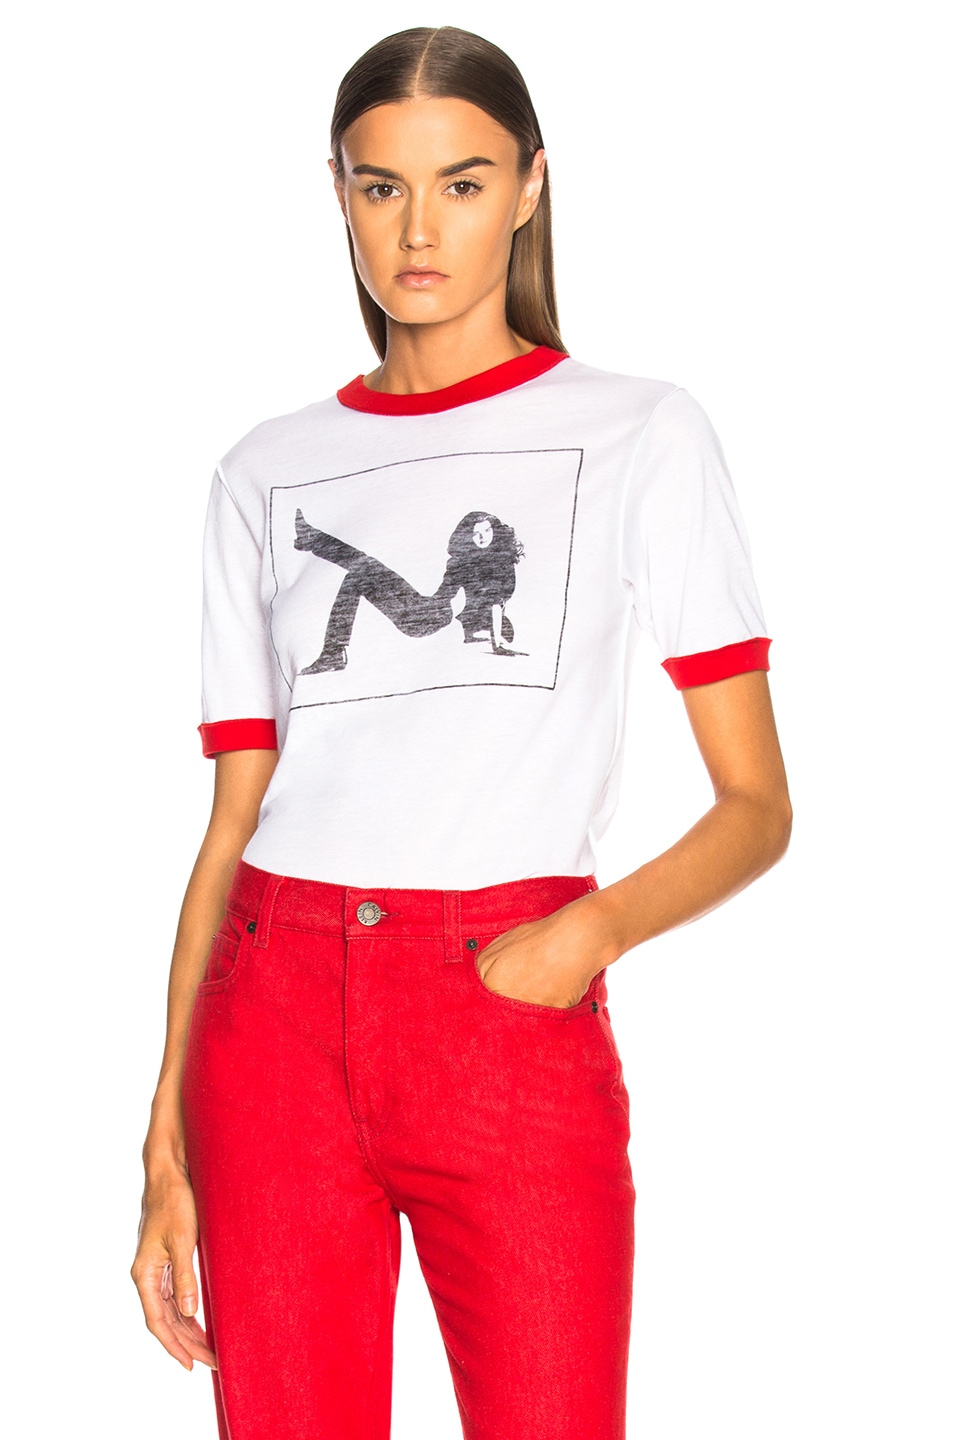 Image 1 of CALVIN KLEIN 205W39NYC Brooke Shields Graphic Tee in White & Red